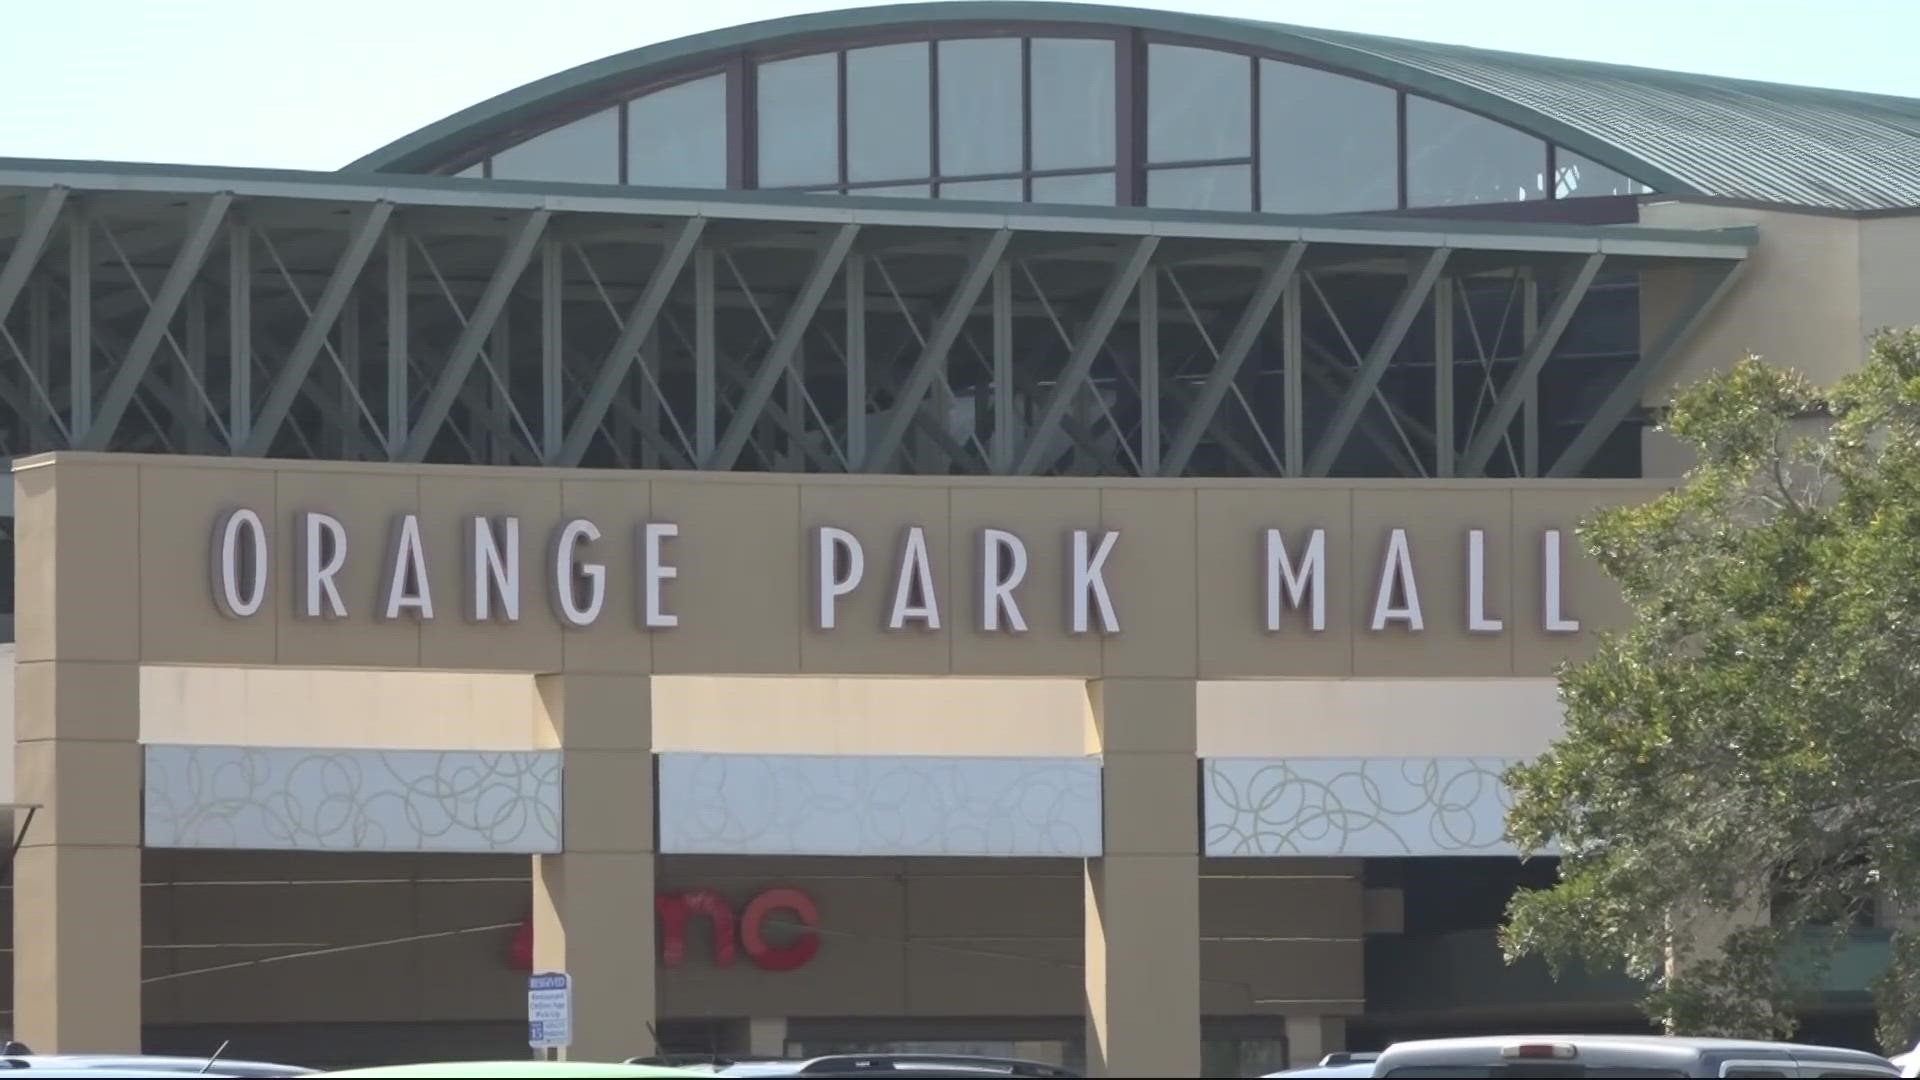 The mall says it's working with the sheriff's office to implement additional safety measures.